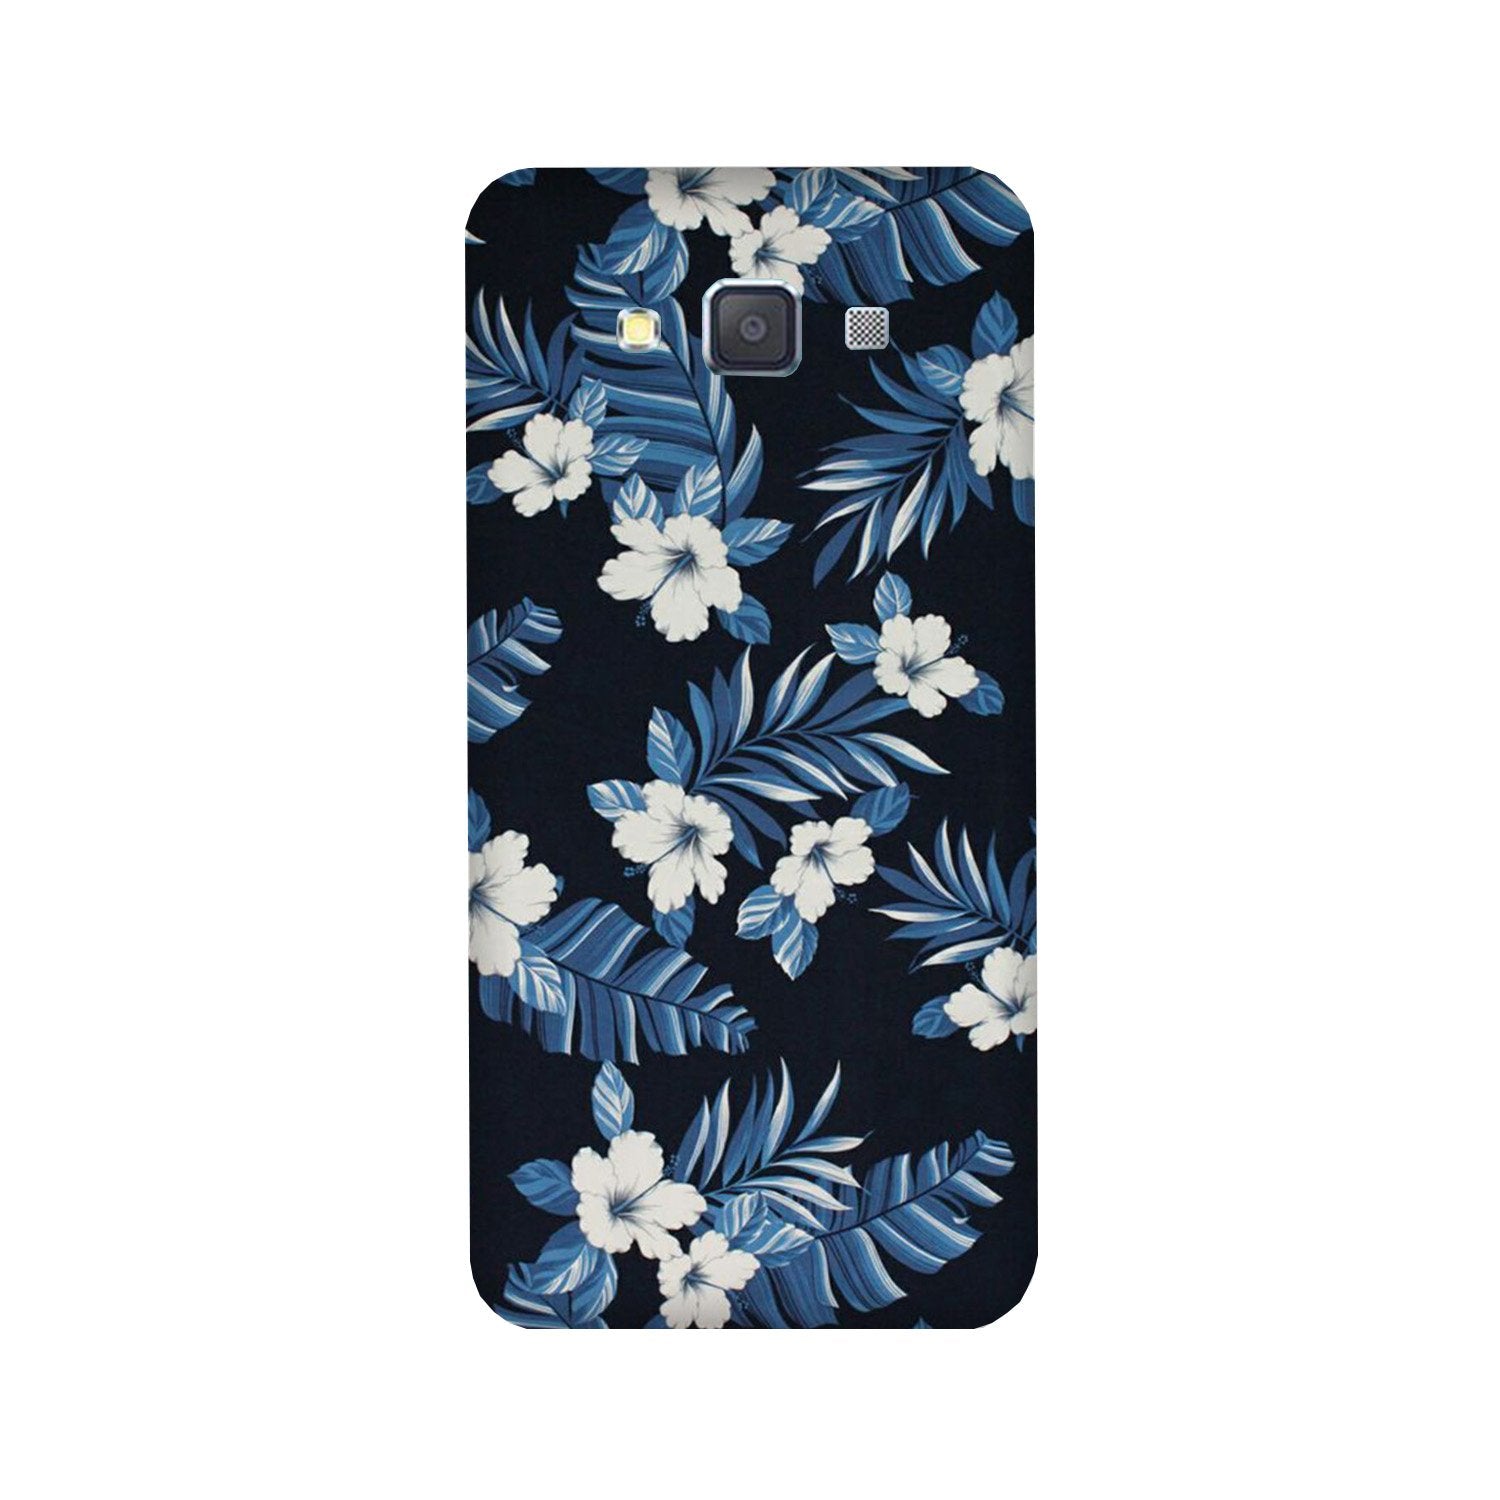 White flowers Blue Background2 Case for Galaxy J5 (2016)